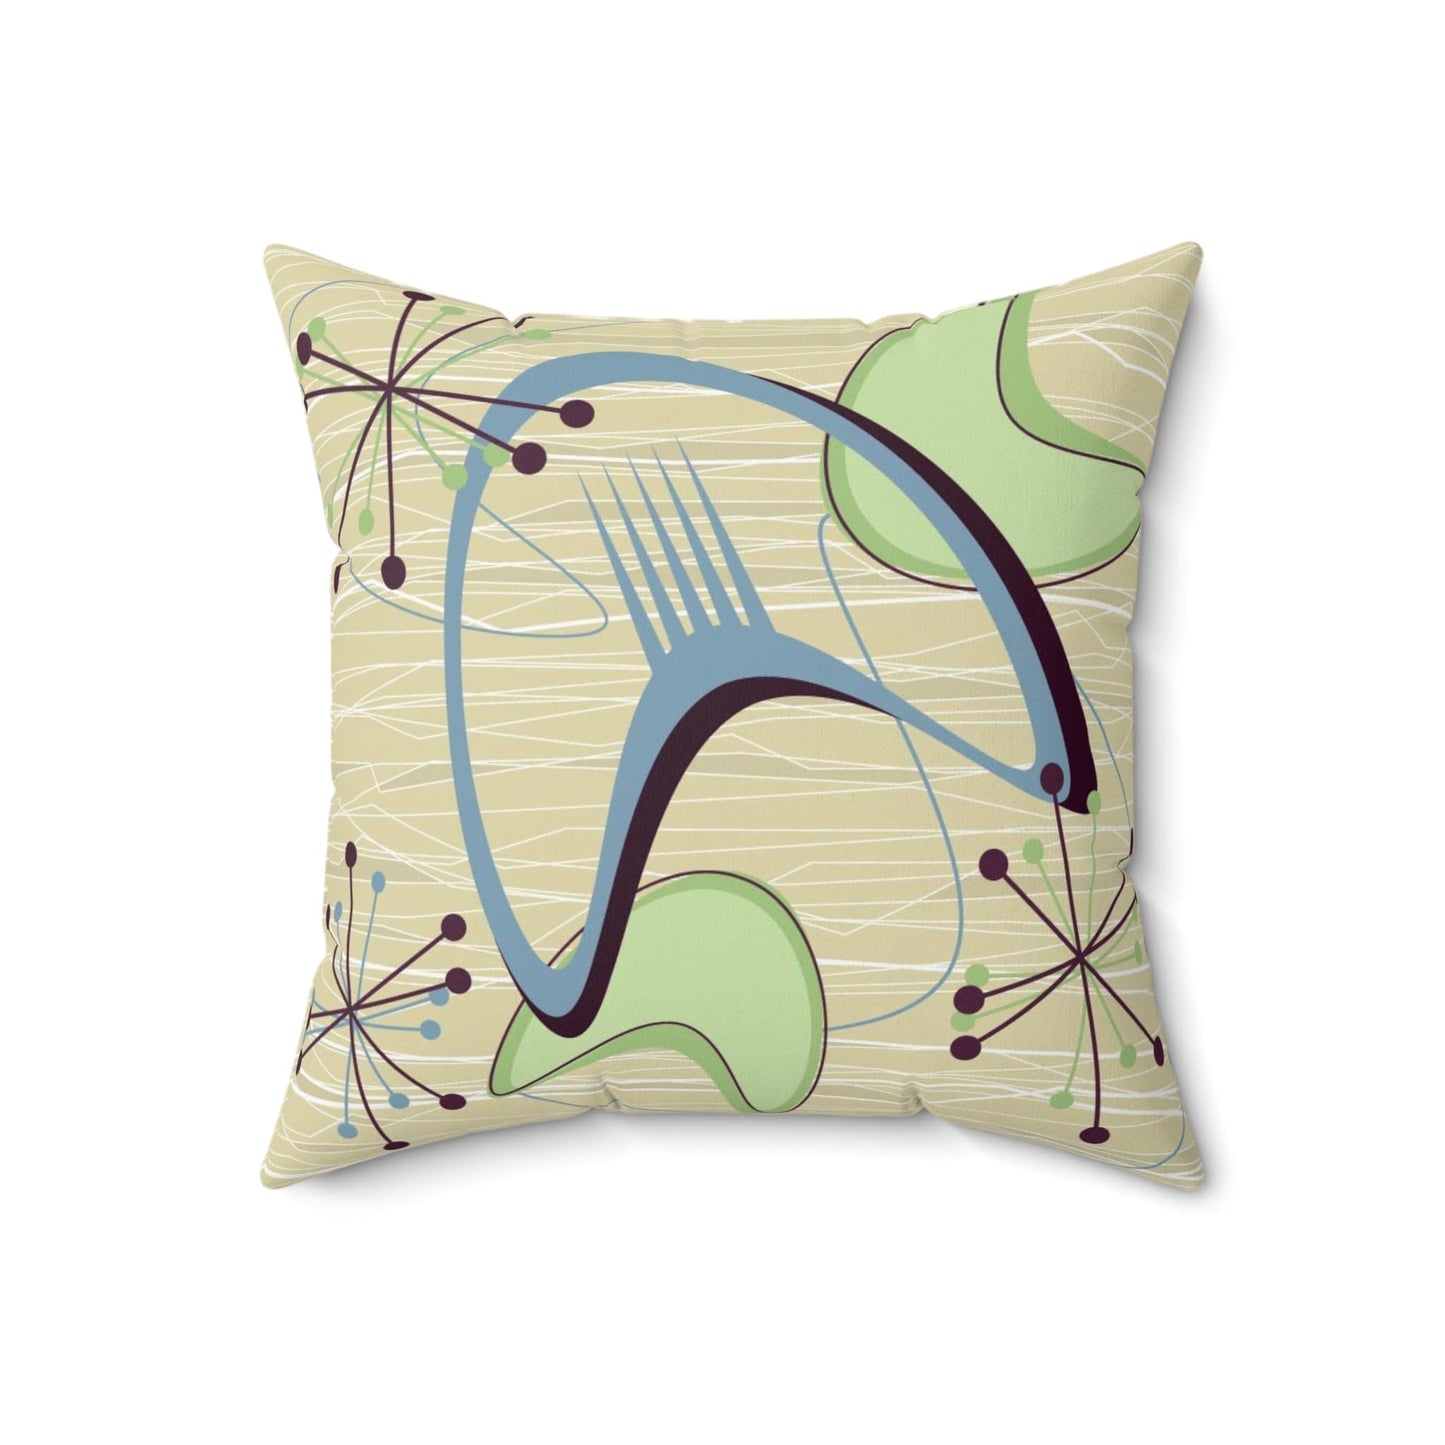 Printify 1950s Atomic Boomerang Mid Century Modern Throw Pillow in Retro Vintage Beige, Blue, Green Geometric Starbursts, MCM Abstract Accent Pillow Home Decor